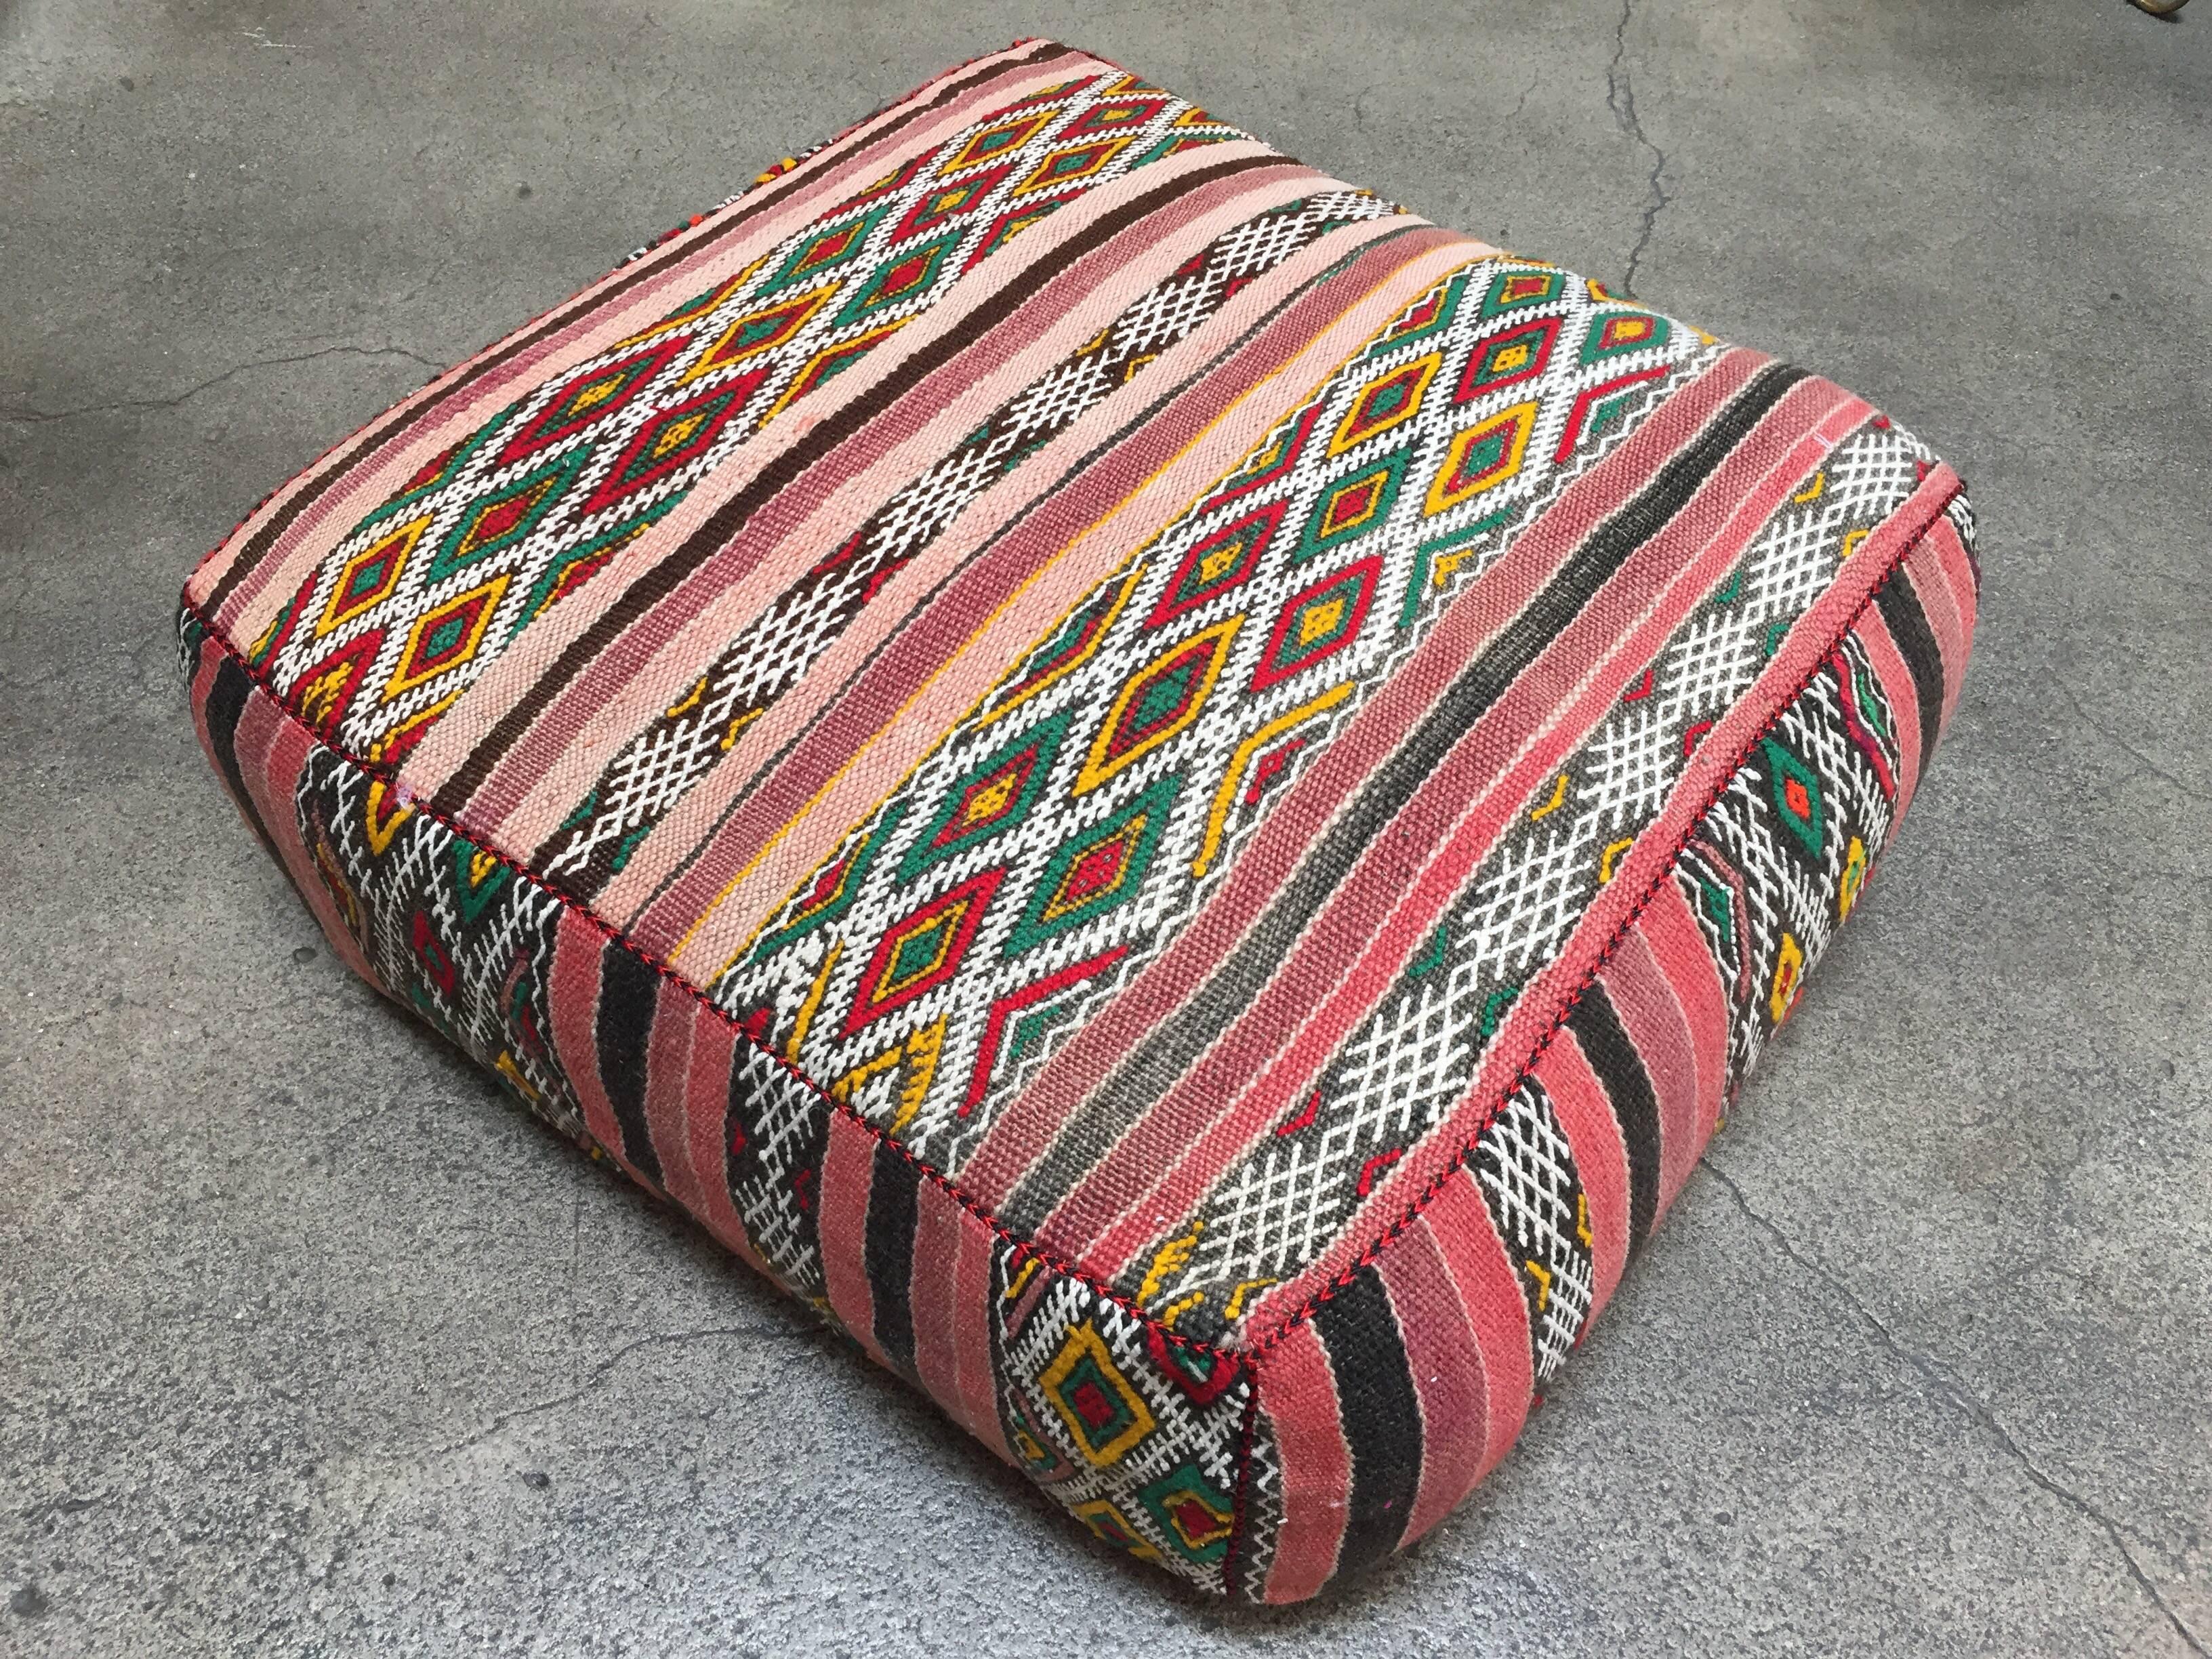 Moroccan vintage floor pillow seat cushion made from a Tribal Berber rug.
Square shape with nice faded earth tone colors for the top and rich warm stripes colors for the bottom.
Great addition for any Bohemian or Modern interior.
Made from a vintage